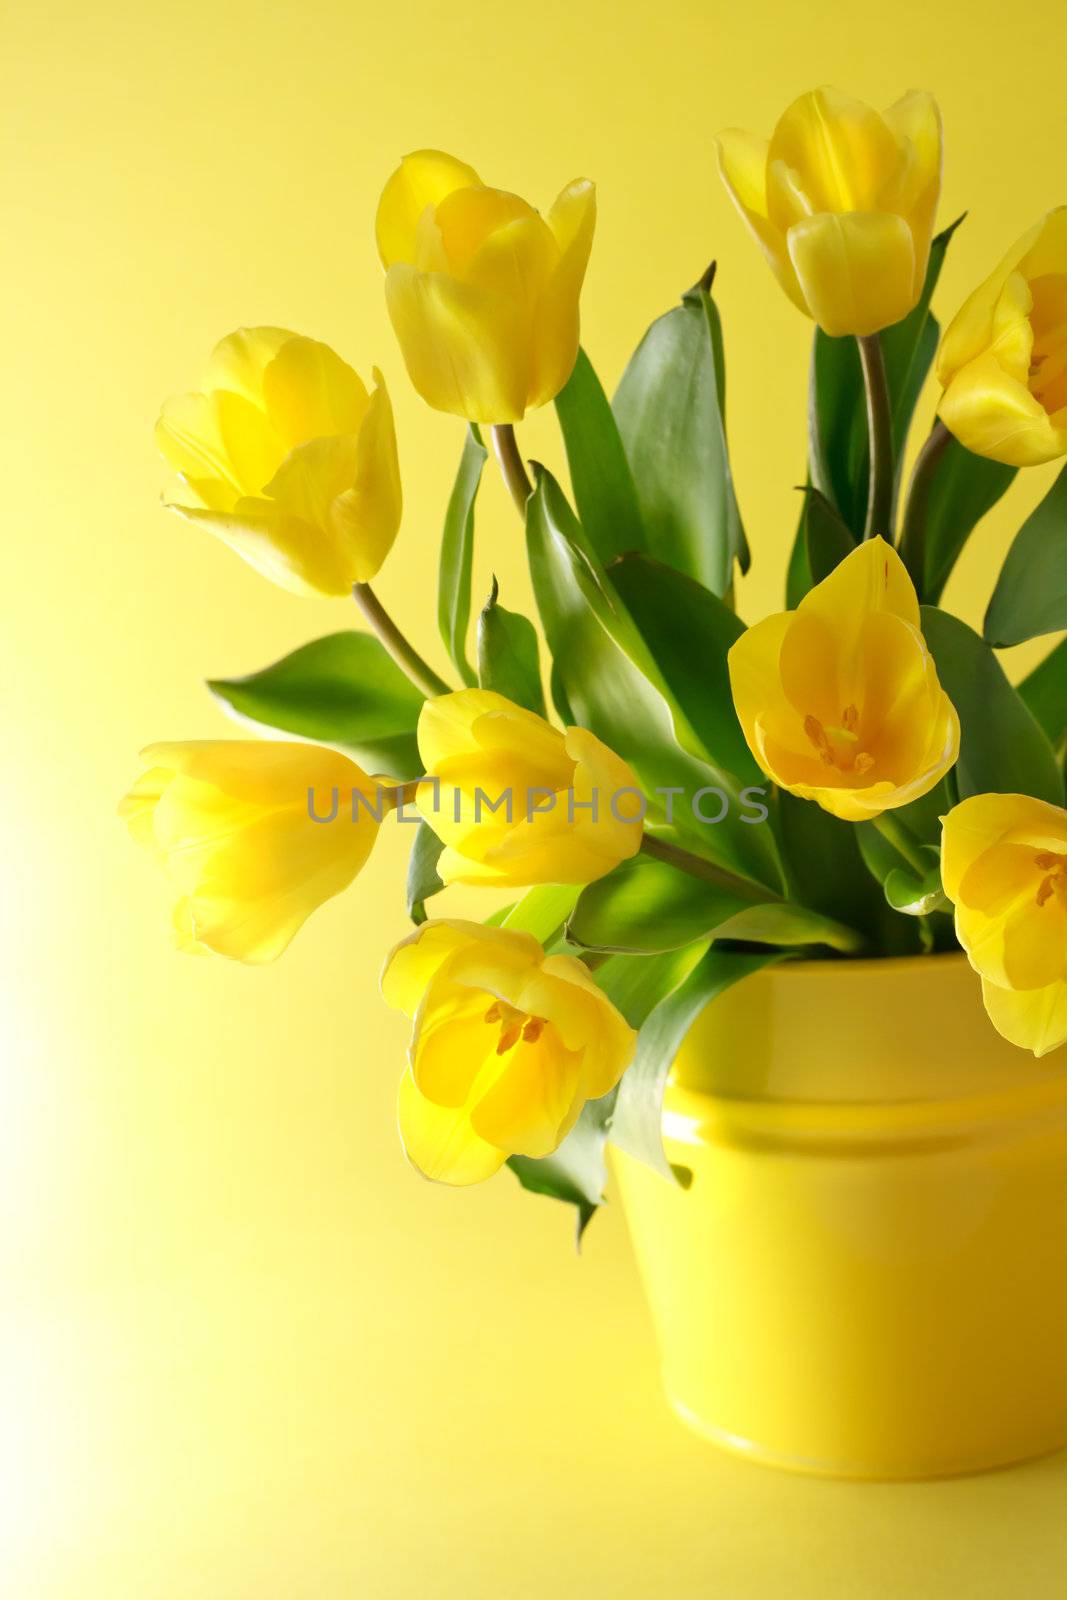 Yellow tulips in a yellow container on a yellow background